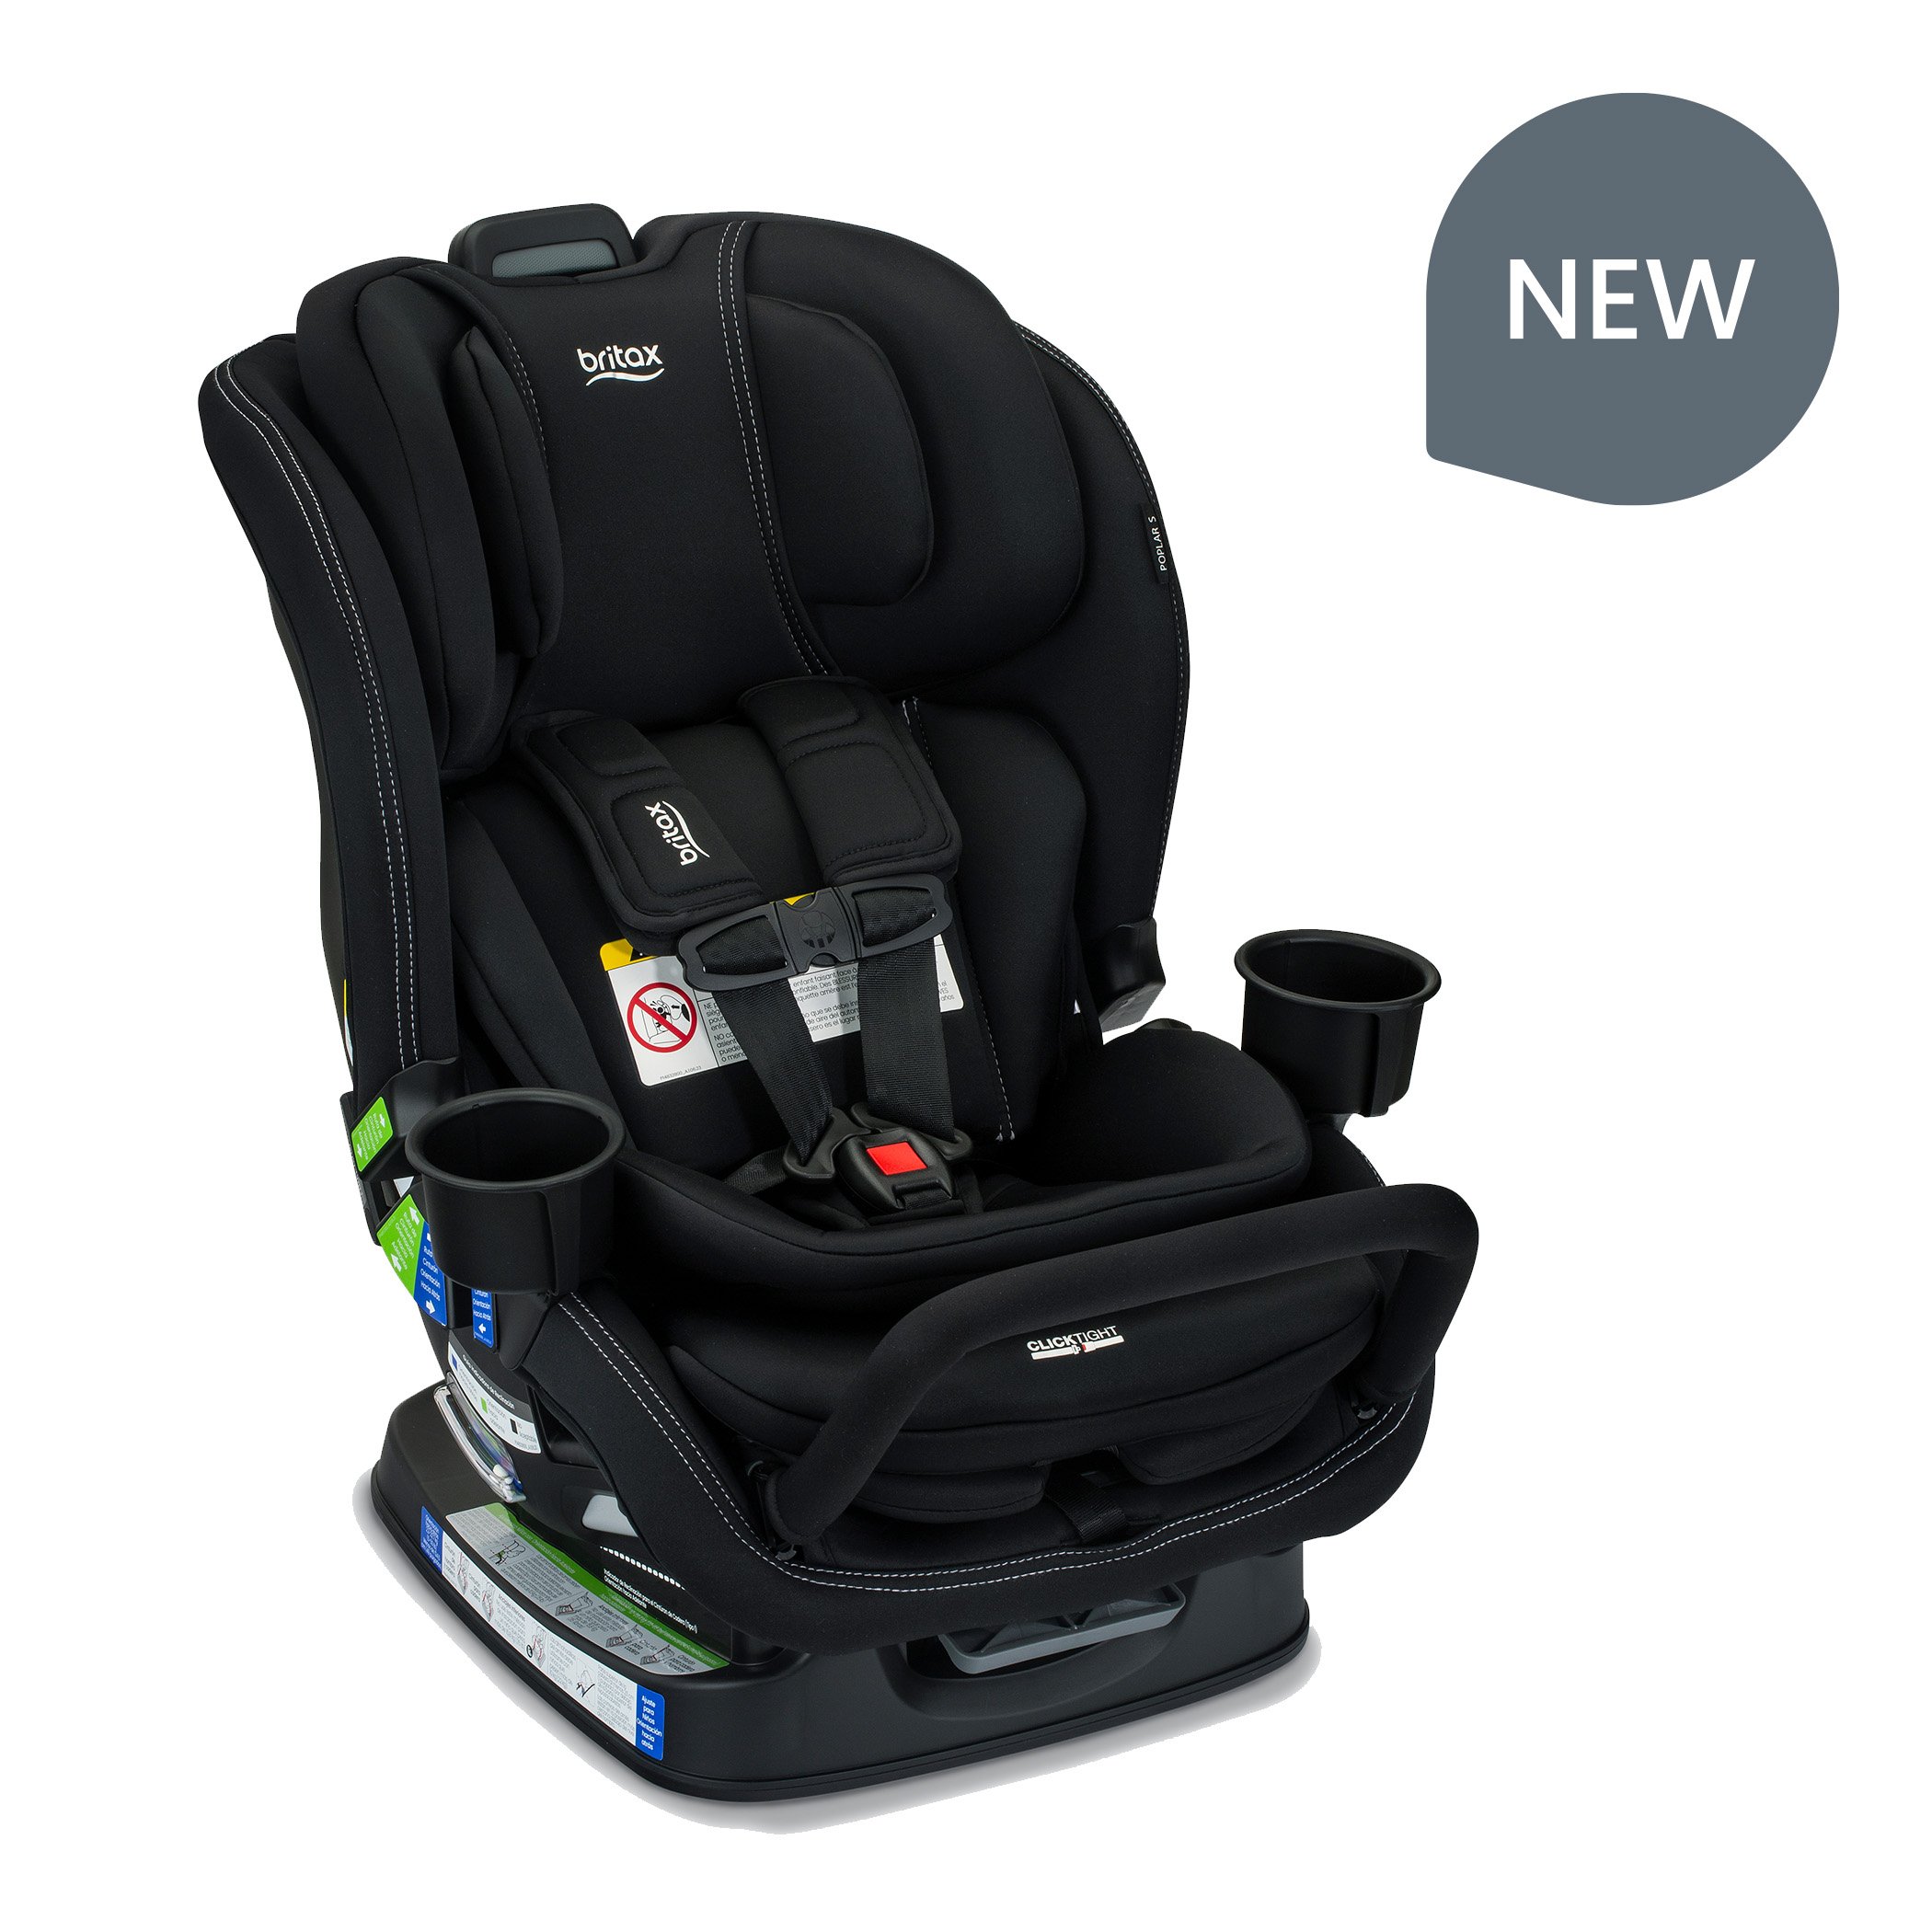 NEW. Black Britax car seat with an anti-rebound bar and two cup holders.  